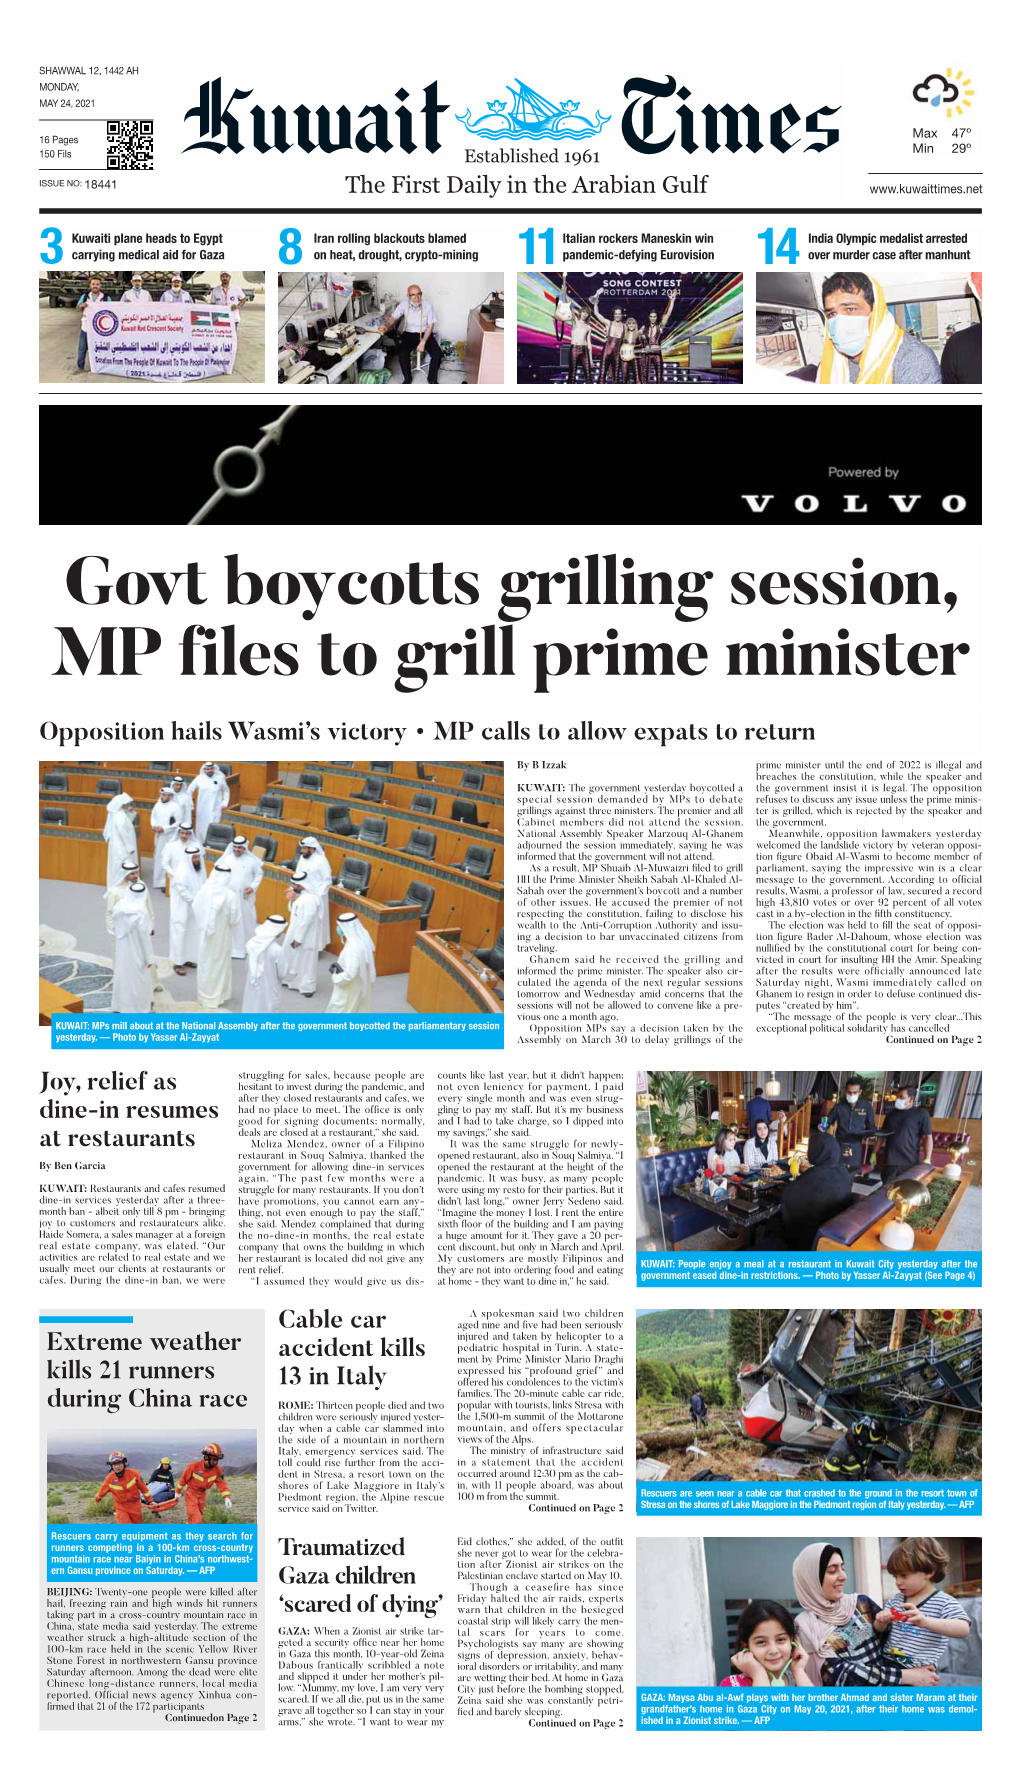 Govt Boycotts Grilling Session, MP Files to Grill Prime Minister